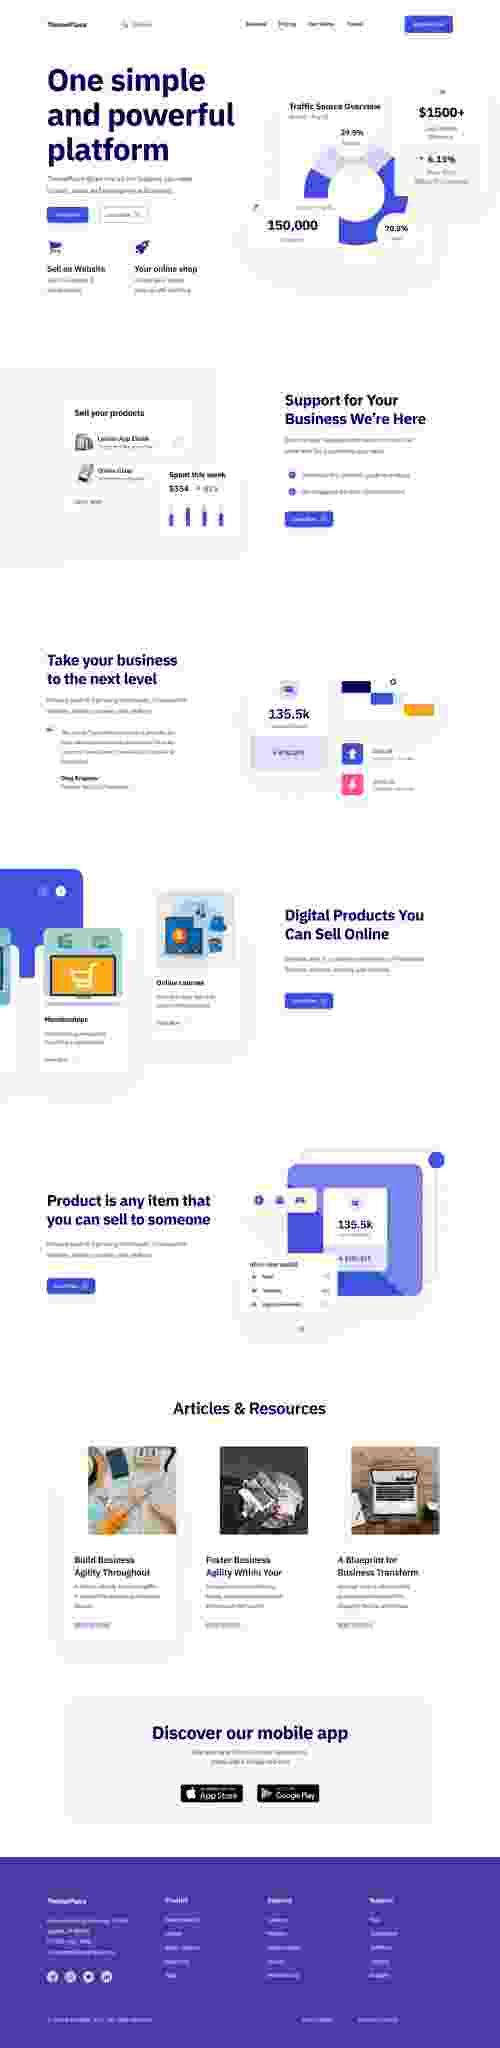 UIHut - ThemePlace Sell Digital Products Online Website - 12096